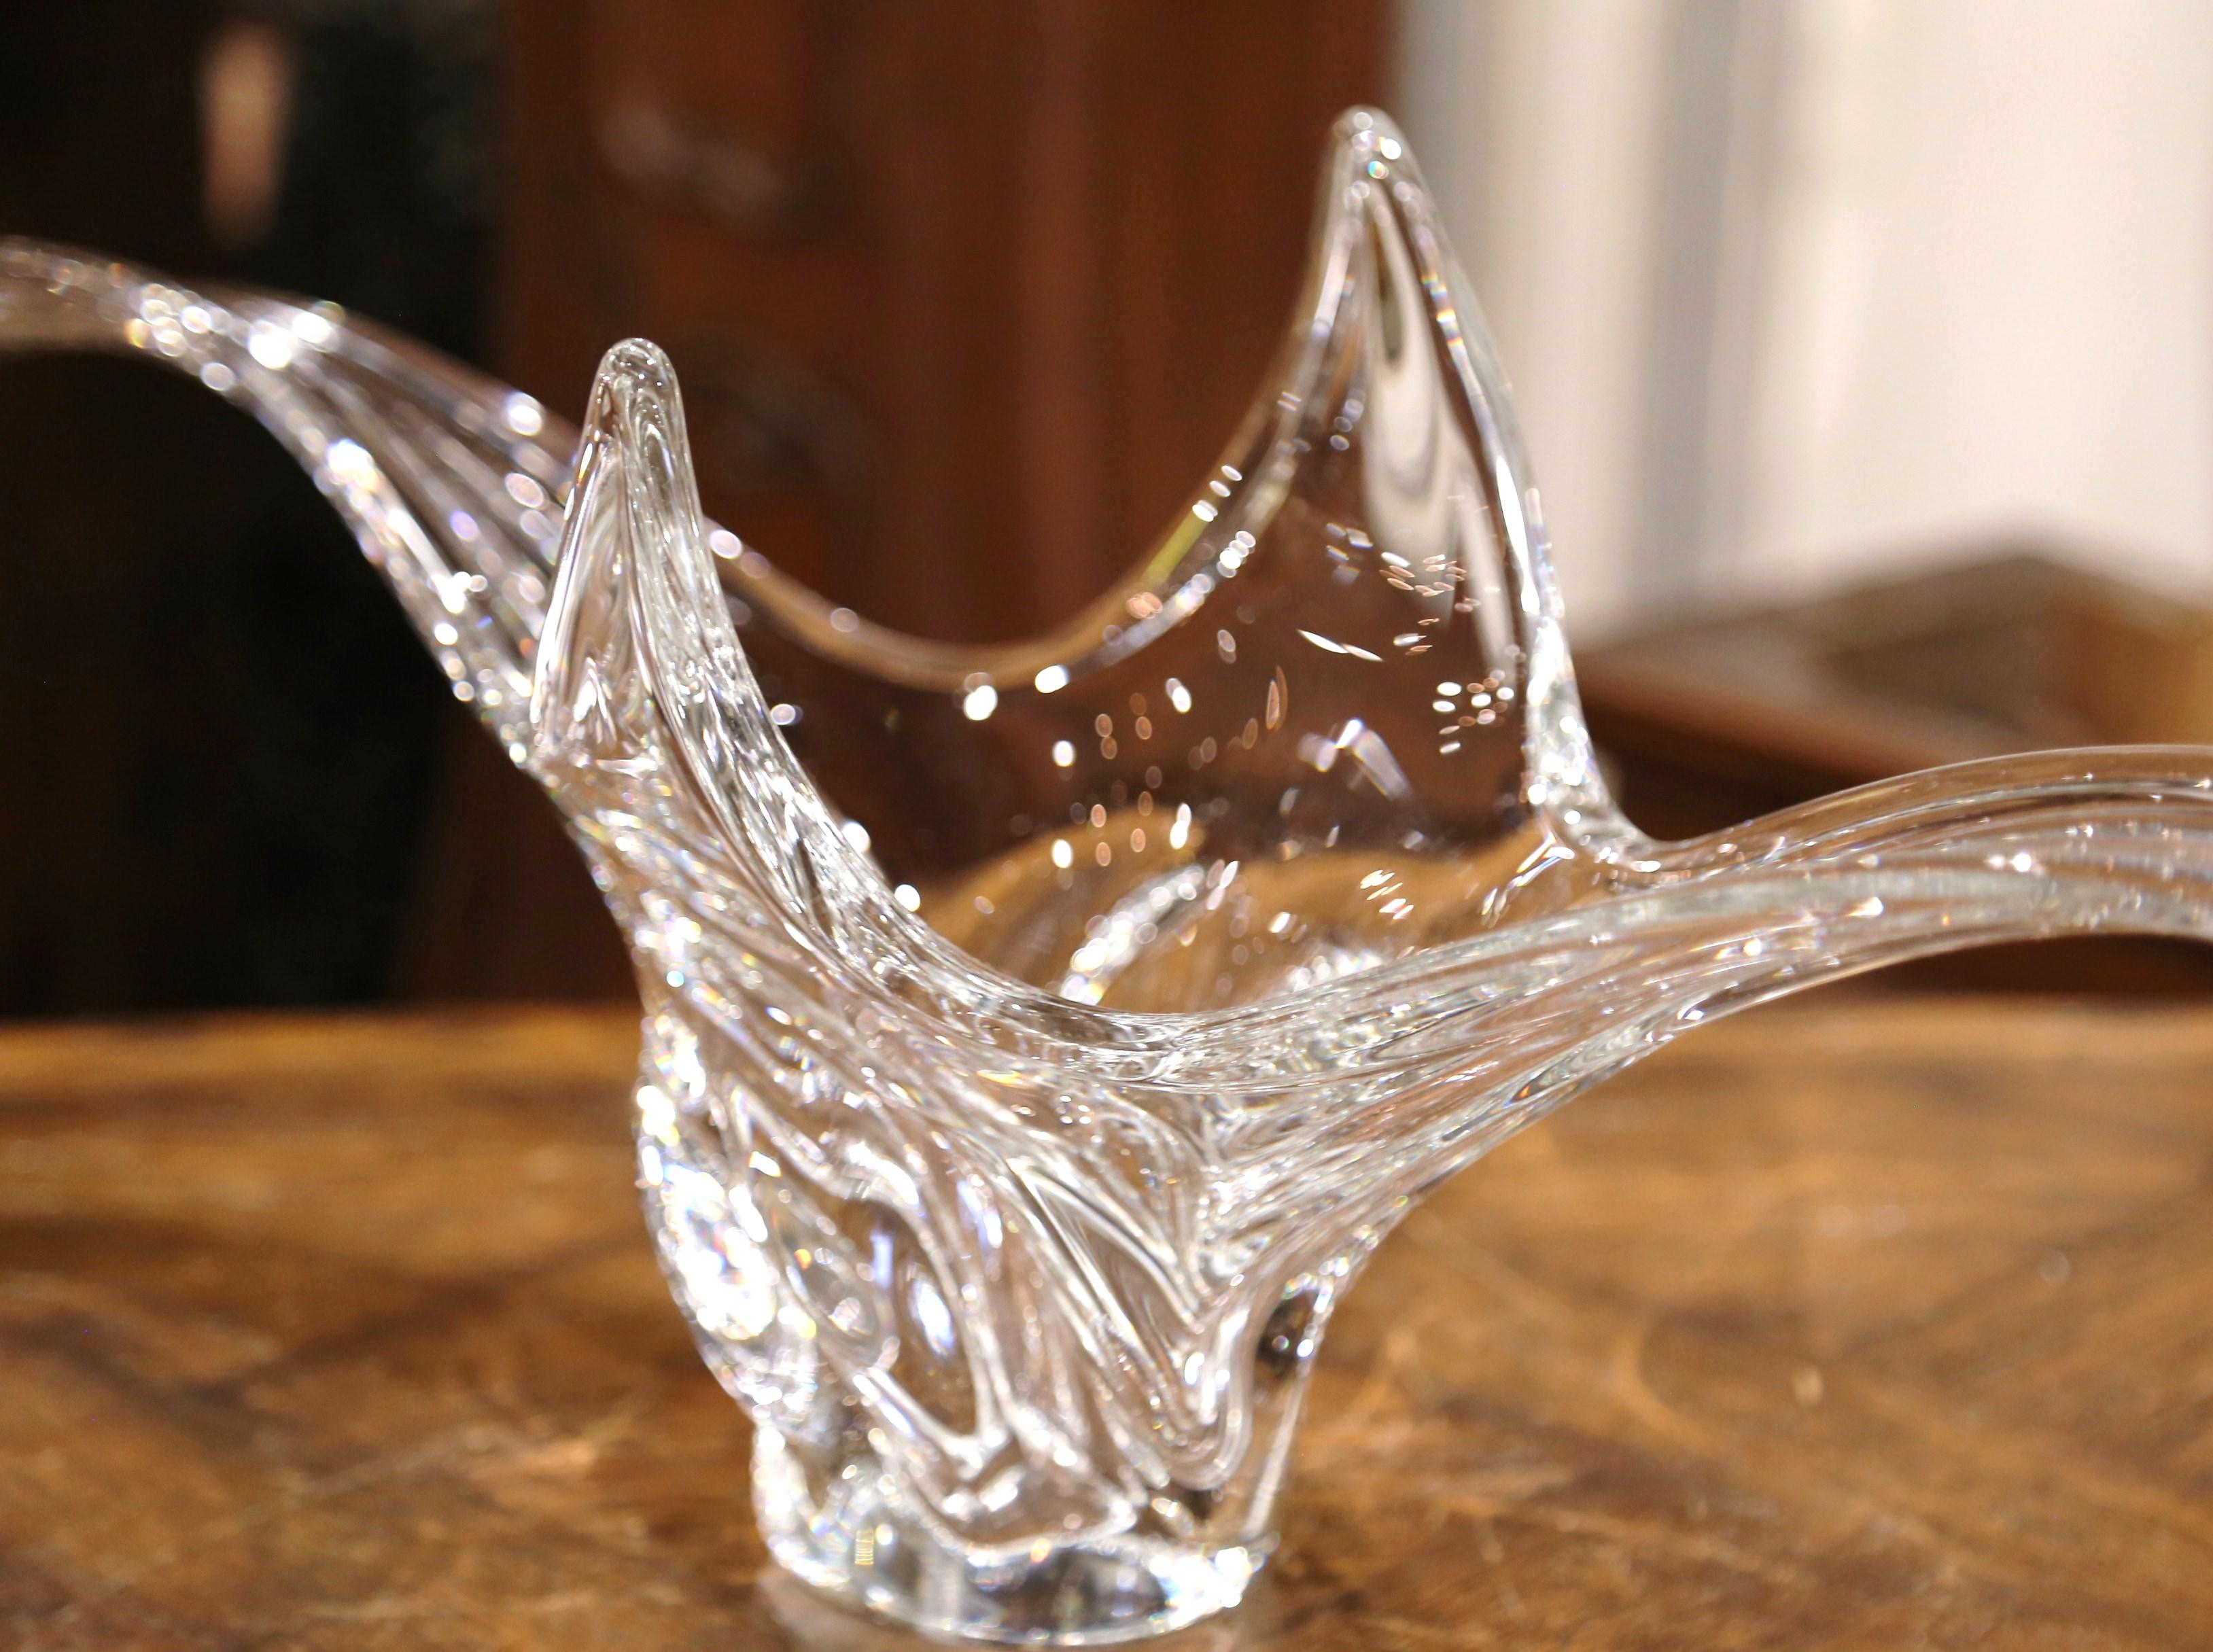 This elegant, hand blown glass vase was crafted in France, circa 1950. The large vintage piece features a pulled feathered technique with an intricate elongated design. The large traditional center piece is in excellent condition with wonderful,